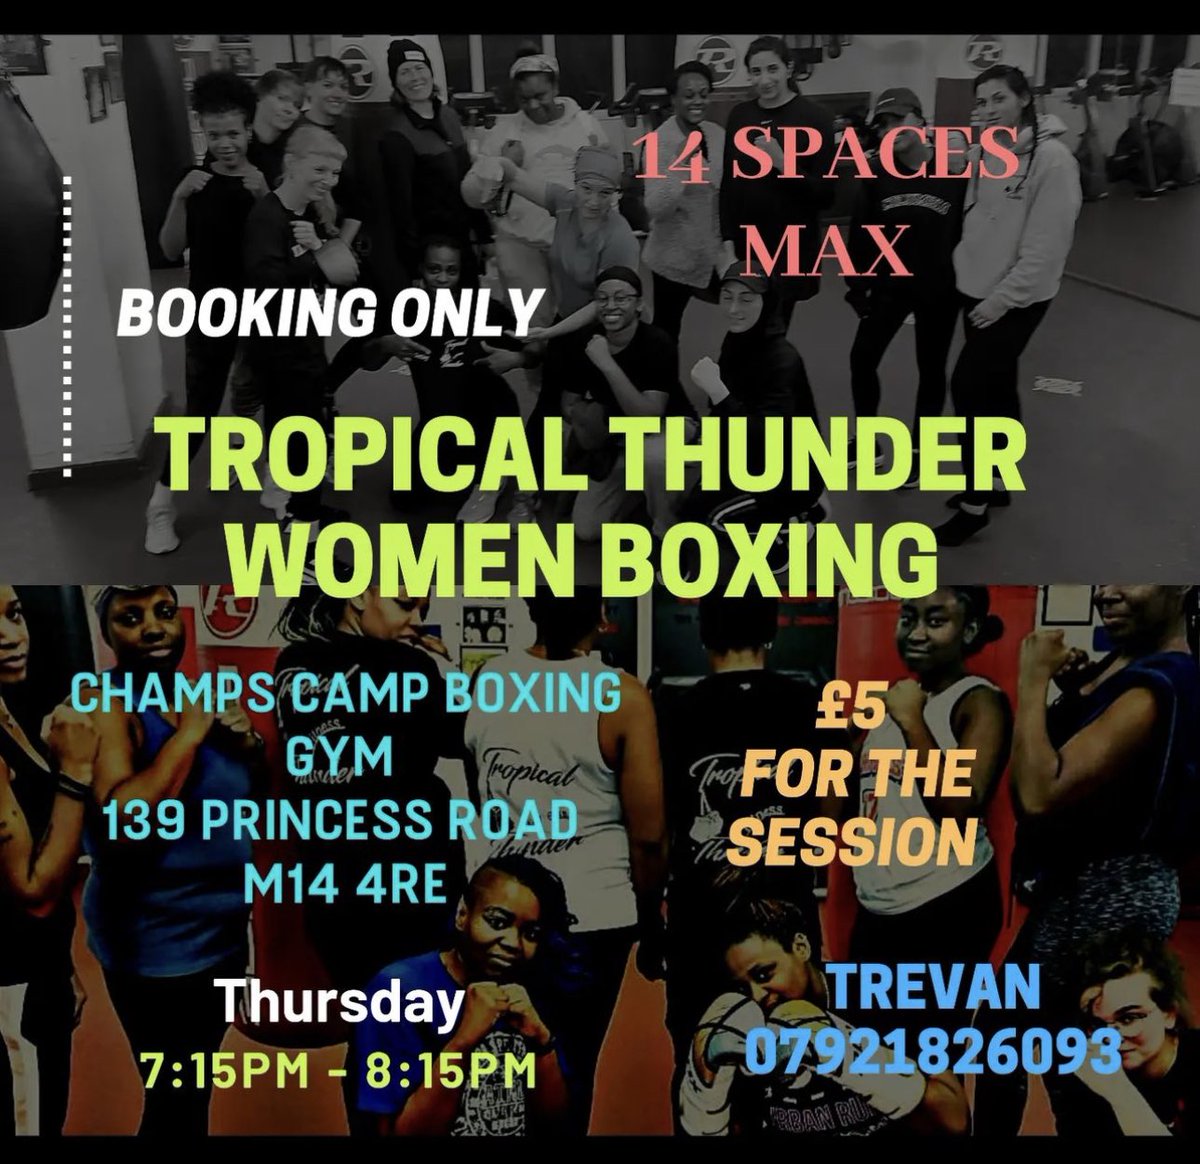 Every Thursday Tropical Thunder Women Boxing session... A boxing session for women. Lots of bag work, skill work and fitness at the end.
#tropicalthunderboxing #boxing #fitness #manchesterboxing #champscamp 
#Women #gym #MossSide